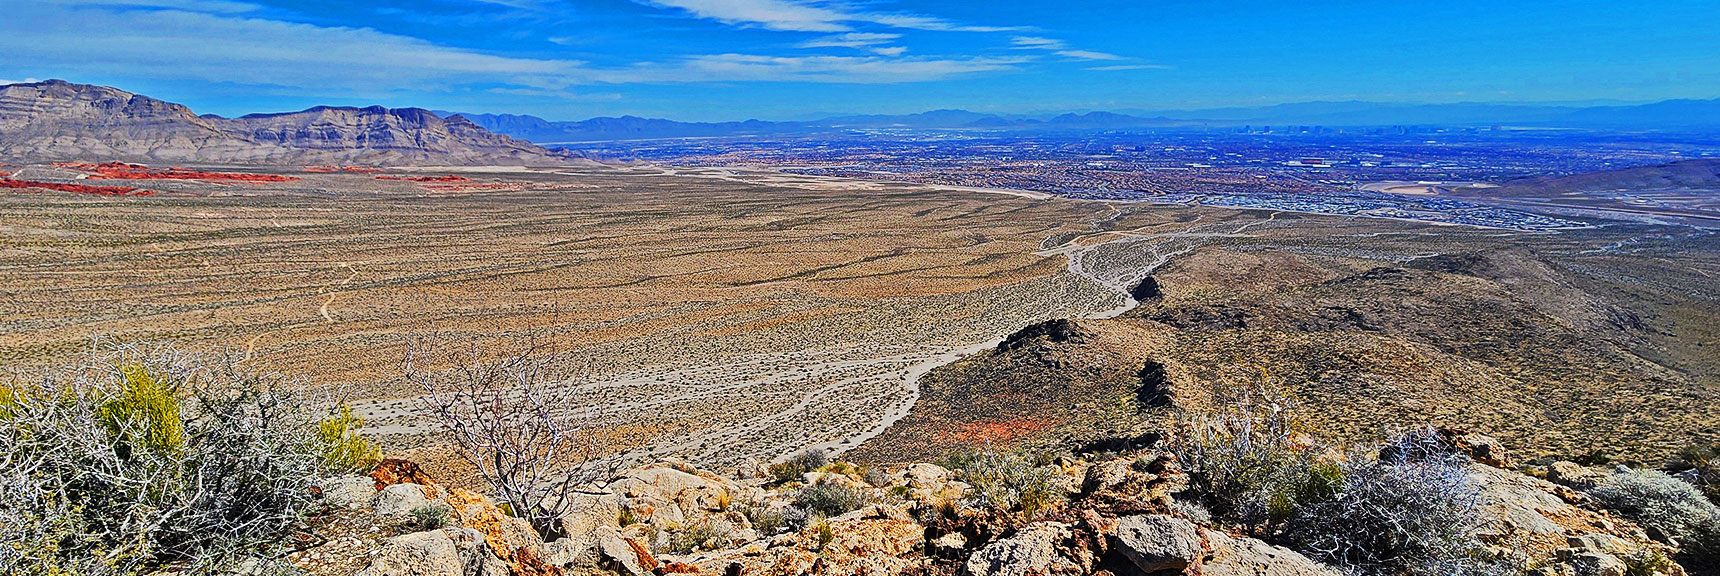 Views Continually Expand as You Ascend. Like Being on a Mountaintop All the Way! | Gray Cap Ridge / Brownstone Basin Loop | La Madre Mountains Wilderness, Nevada